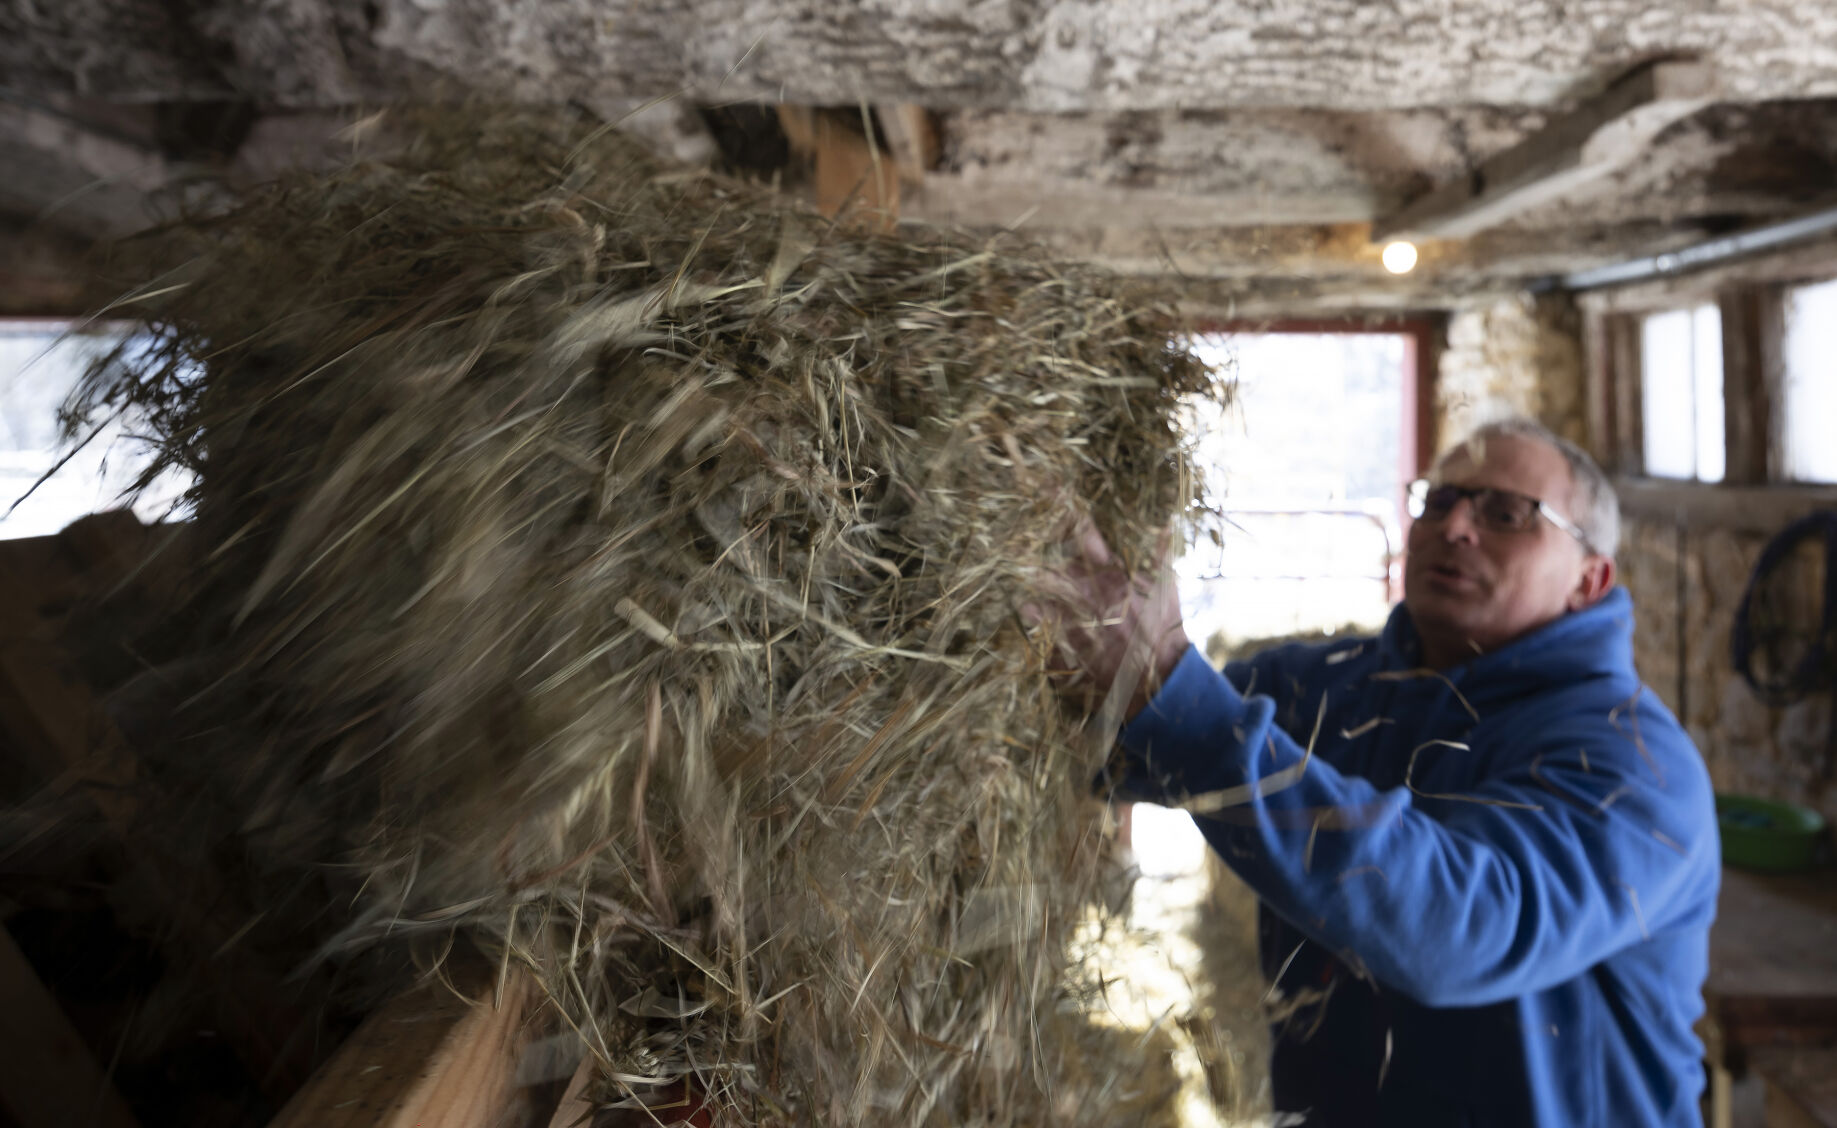 Kerwin Kilian gives hay to the cattle at Oak Hollow Farm in rural Platteville, Wis.    PHOTO CREDIT: Stephen Gassman
Telegraph Herald